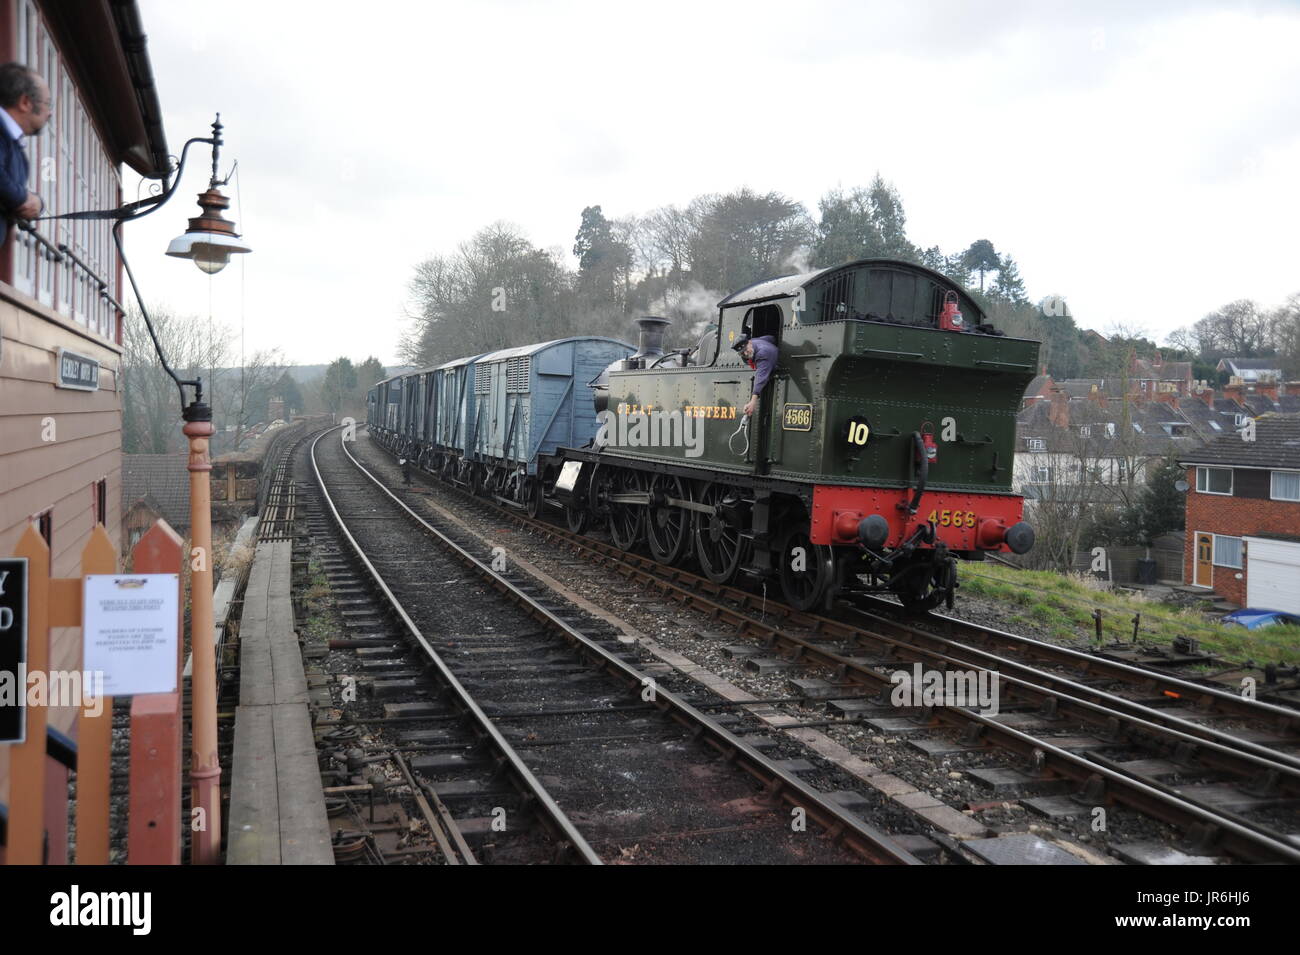 '4566' enters Bewdley Station with a goods train. Severn Valley Railway. Stock Photo